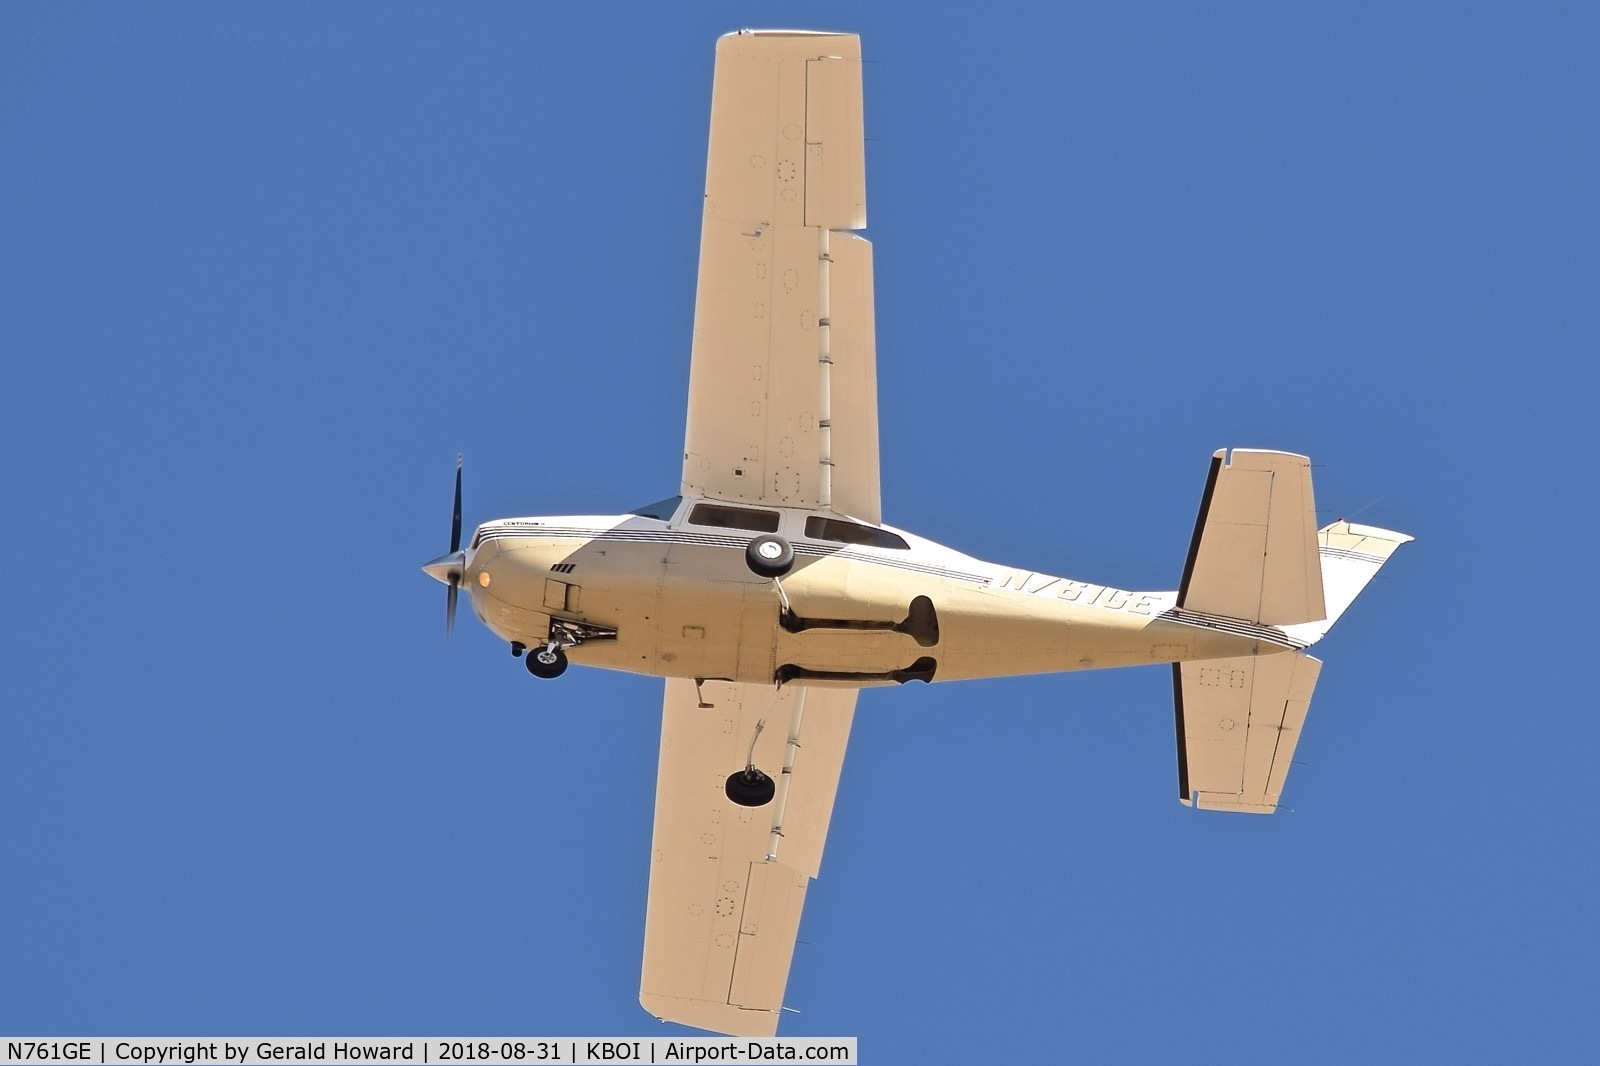 N761GE, 1977 Cessna T210M Turbo Centurion C/N 21062239, Climb out from RWY 28L.